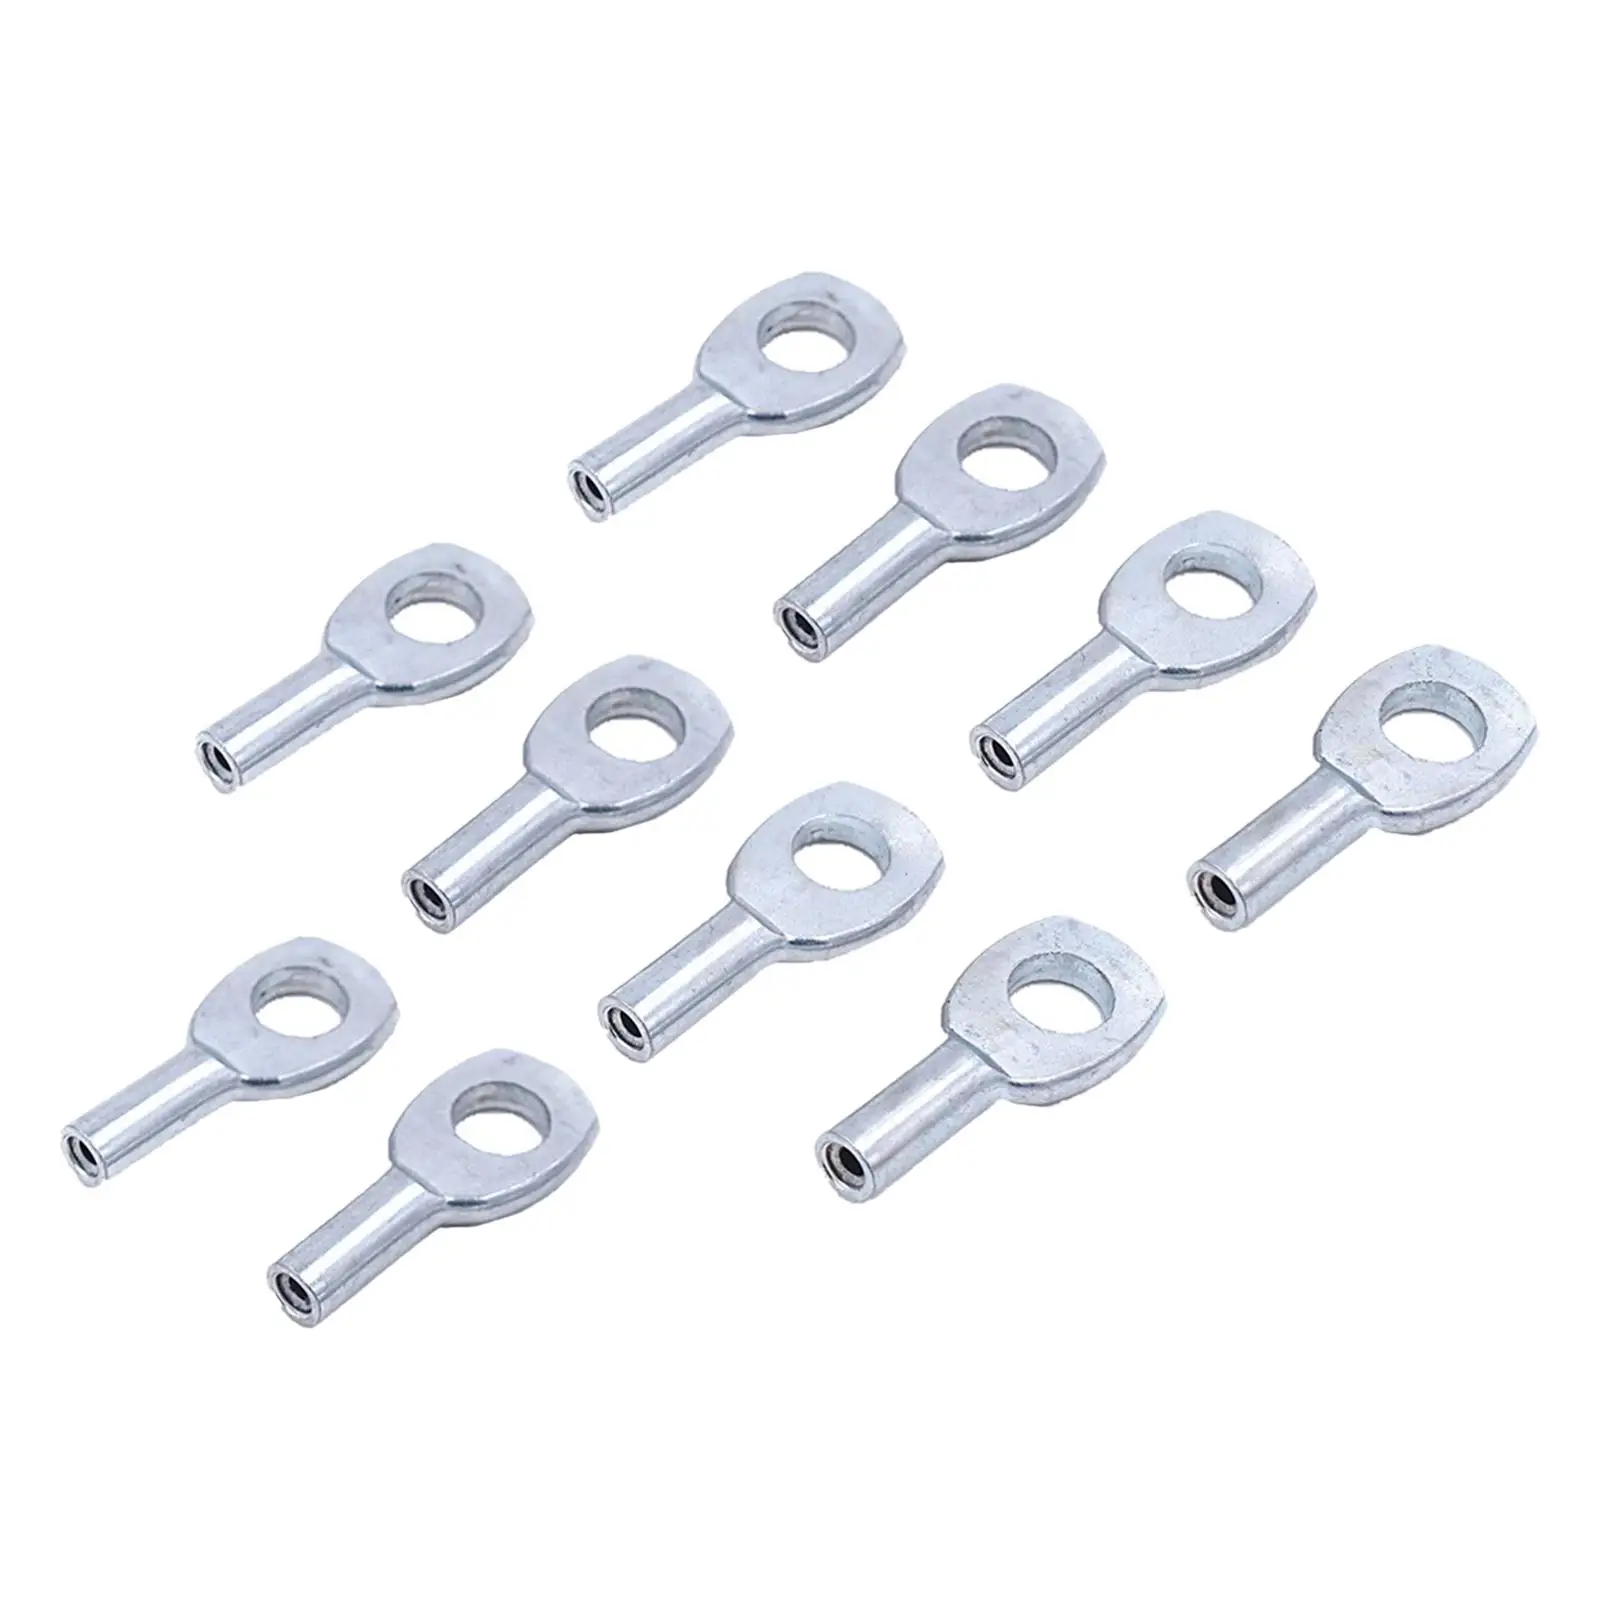 Steel Wire Rope Eyelets Gym Equipment Parts Accessories Strength Training Terminals Attachments for 2mm Wire Rope